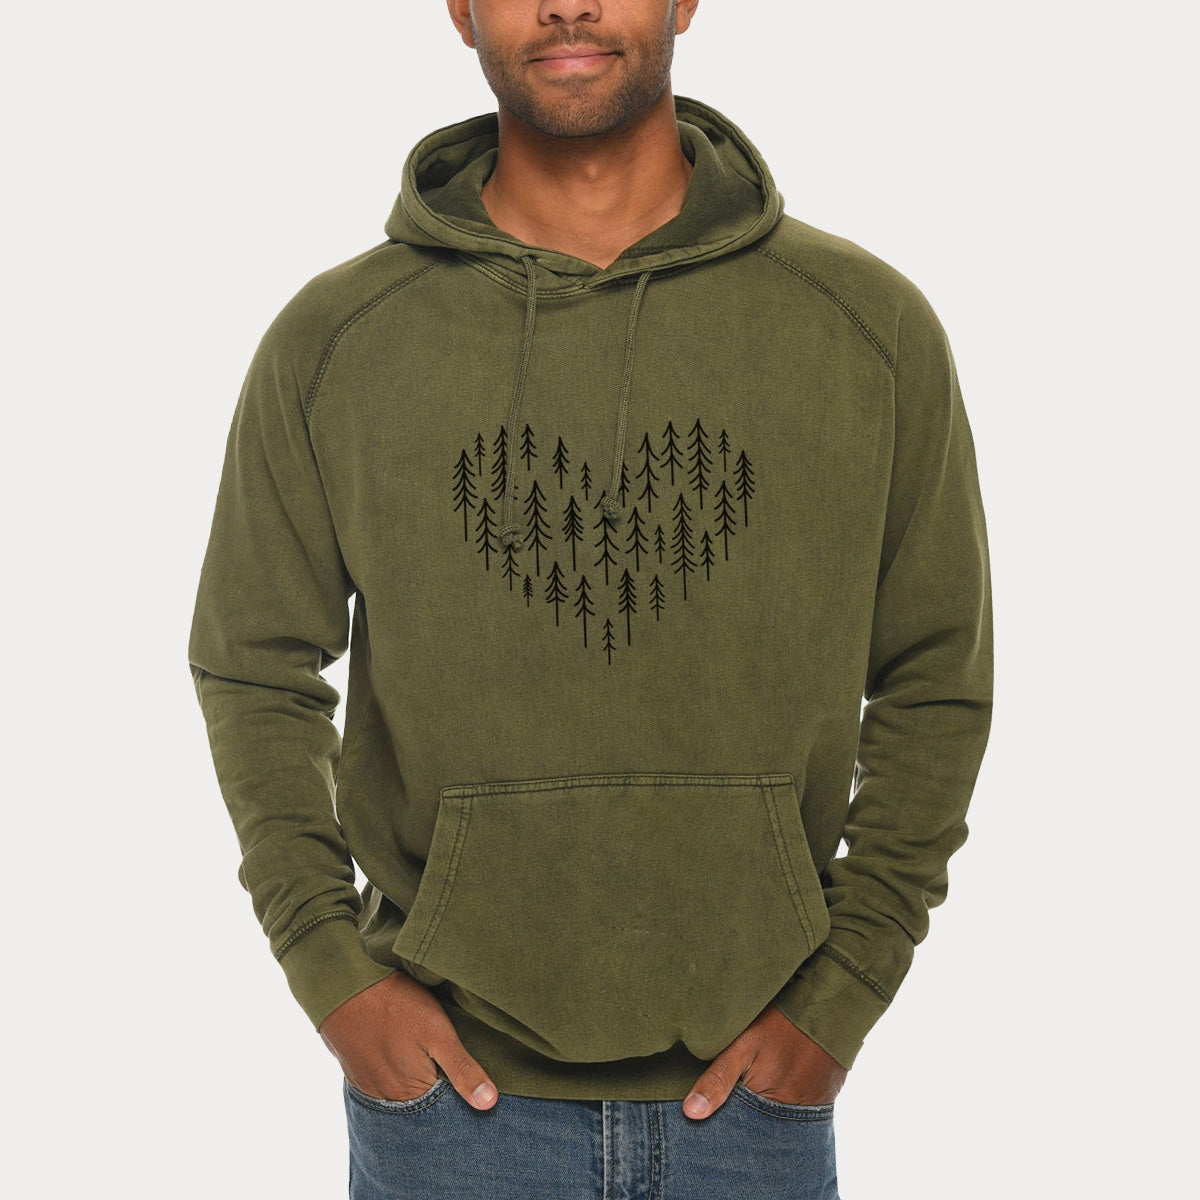 Heart of Trees  - Mid-Weight Unisex Vintage 100% Cotton Hoodie